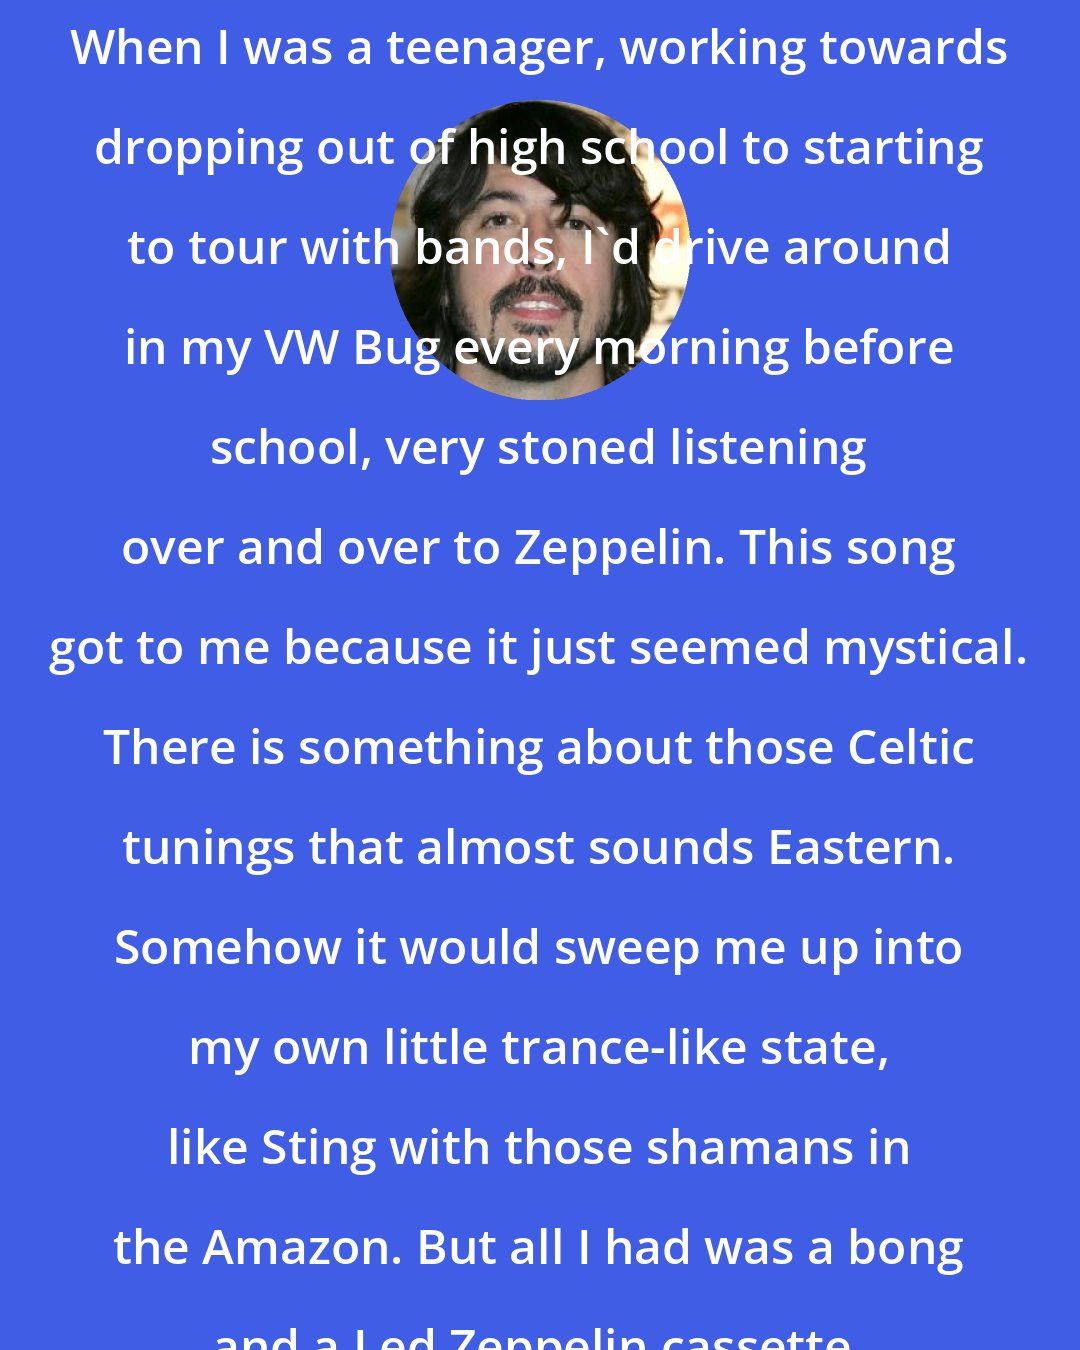 Dave Grohl: When I was a teenager, working towards dropping out of high school to starting to tour with bands, I'd drive around in my VW Bug every morning before school, very stoned listening over and over to Zeppelin. This song got to me because it just seemed mystical. There is something about those Celtic tunings that almost sounds Eastern. Somehow it would sweep me up into my own little trance-like state, like Sting with those shamans in the Amazon. But all I had was a bong and a Led Zeppelin cassette.